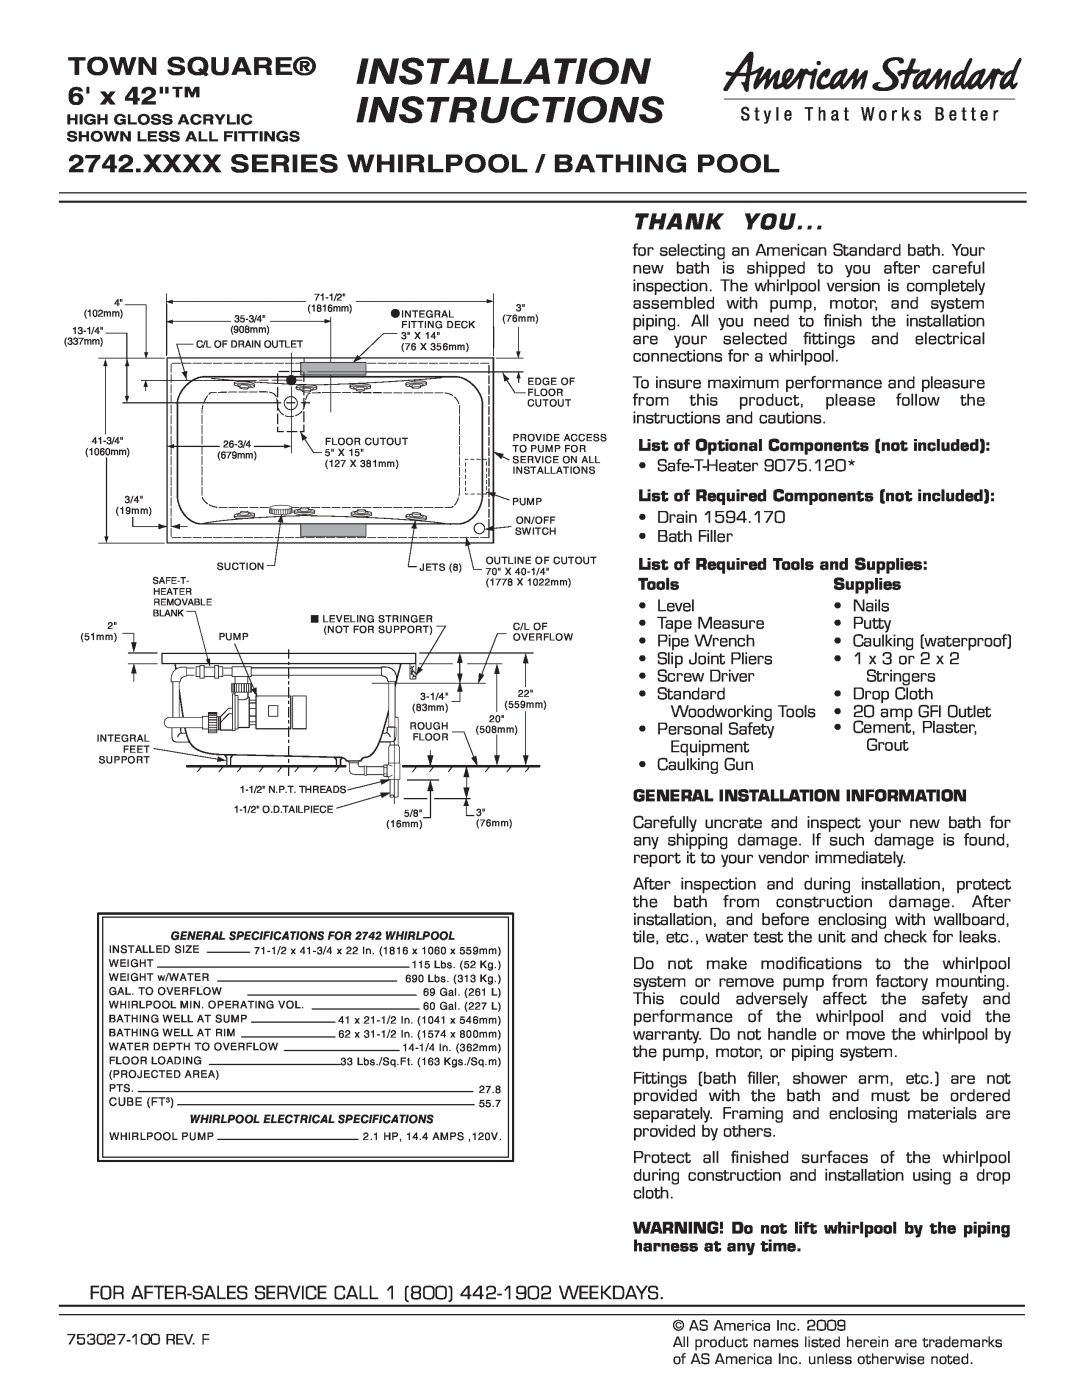 American Standard 2742.XXXX installation instructions TOWN SQUARE 6, Xxxx Series Whirlpool / Bathing Pool, Thank You 